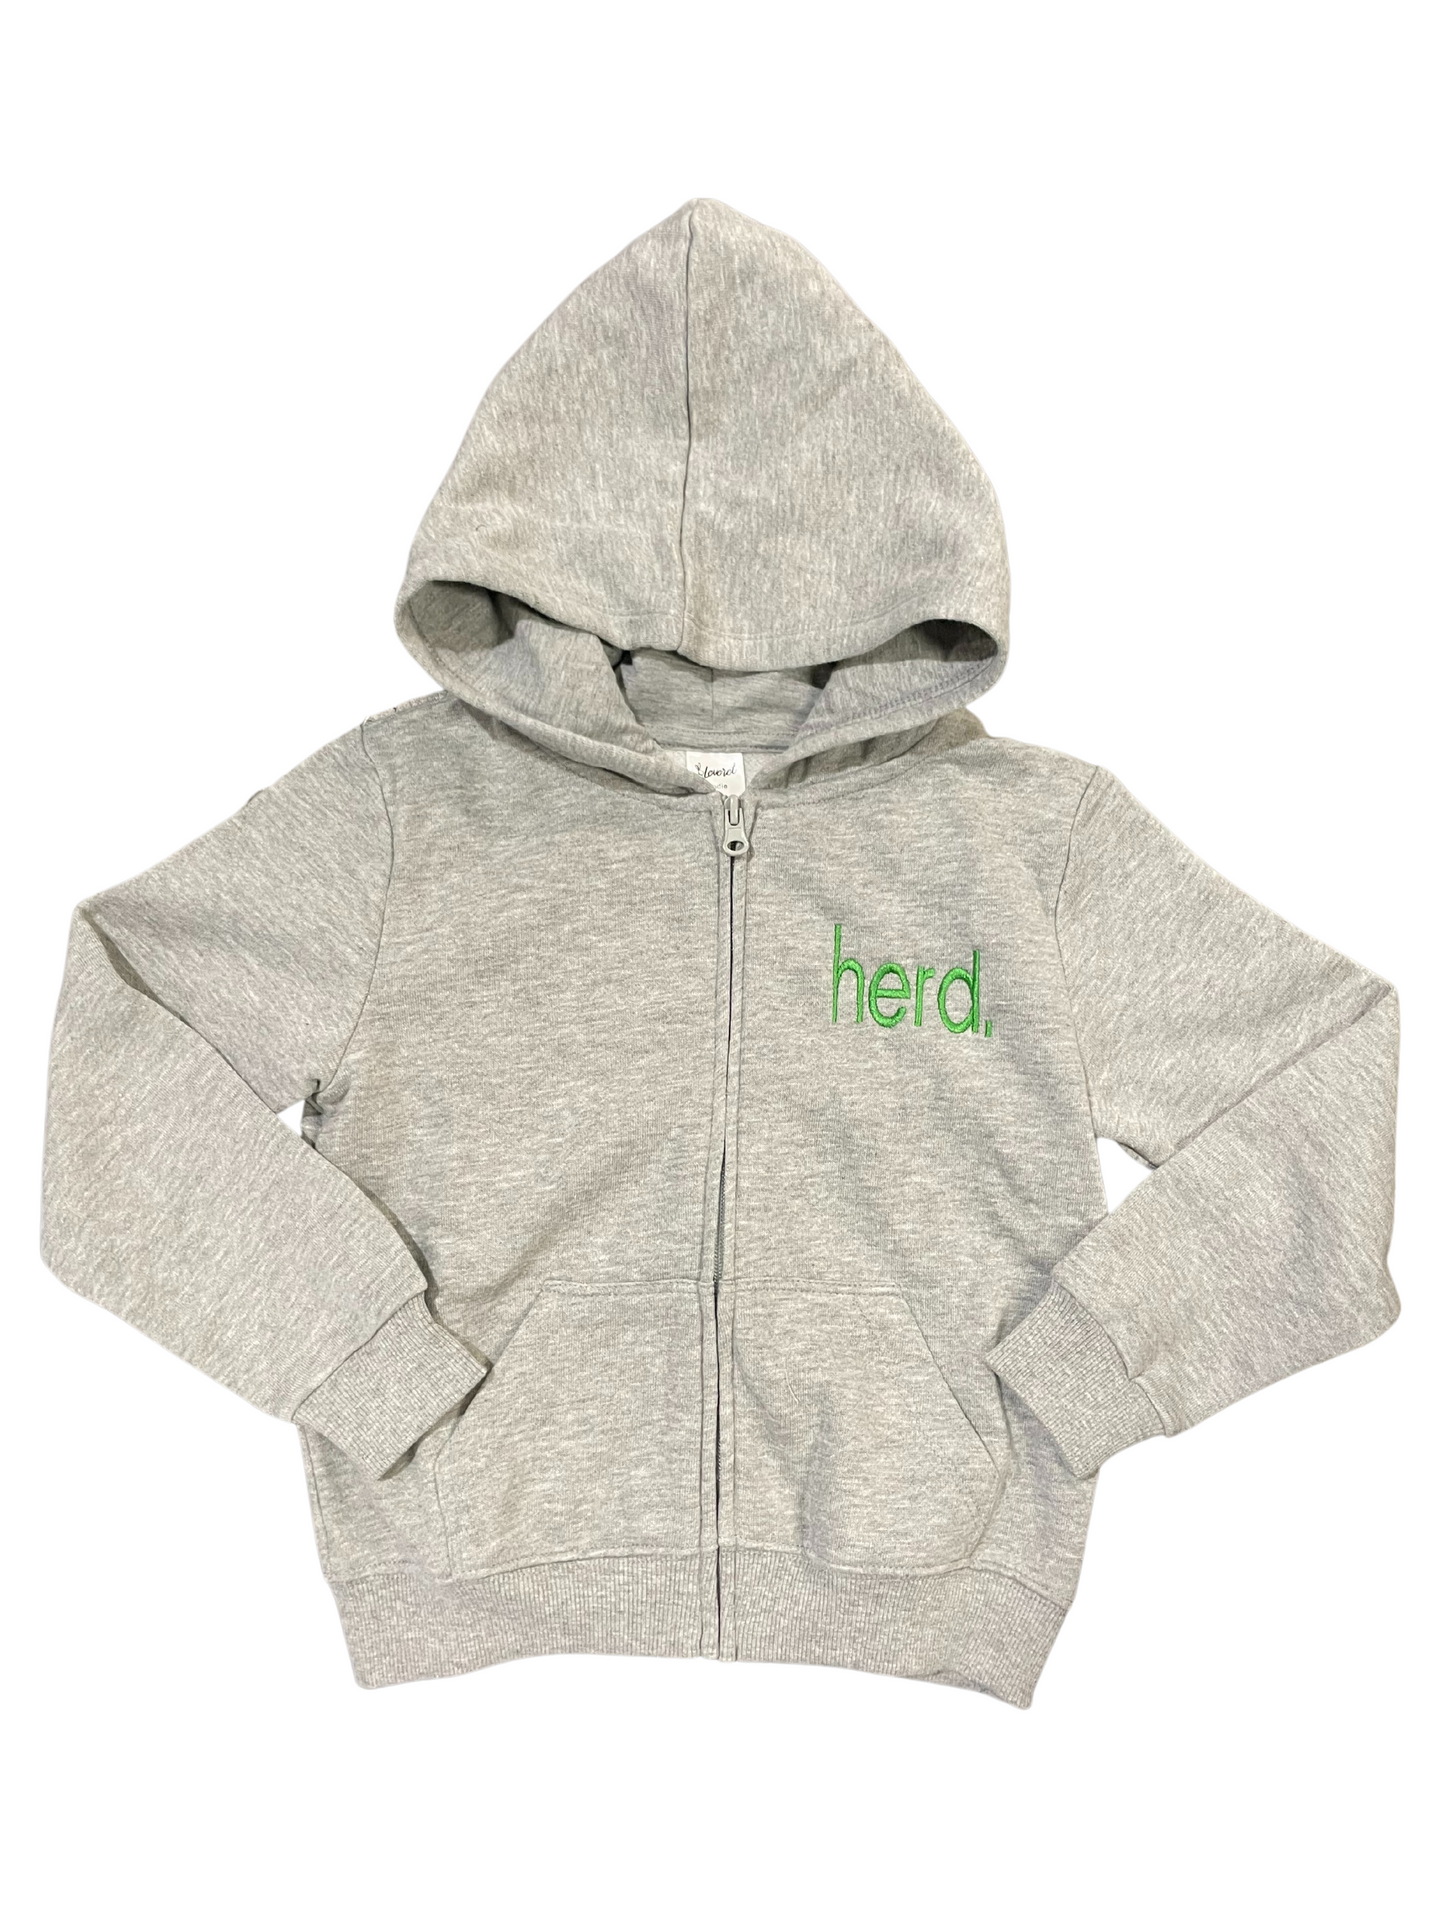 KIDS MARSHALL UNIVERISTY HERD HOODIE - THE LITTLE EAGLE BOUTIQUE